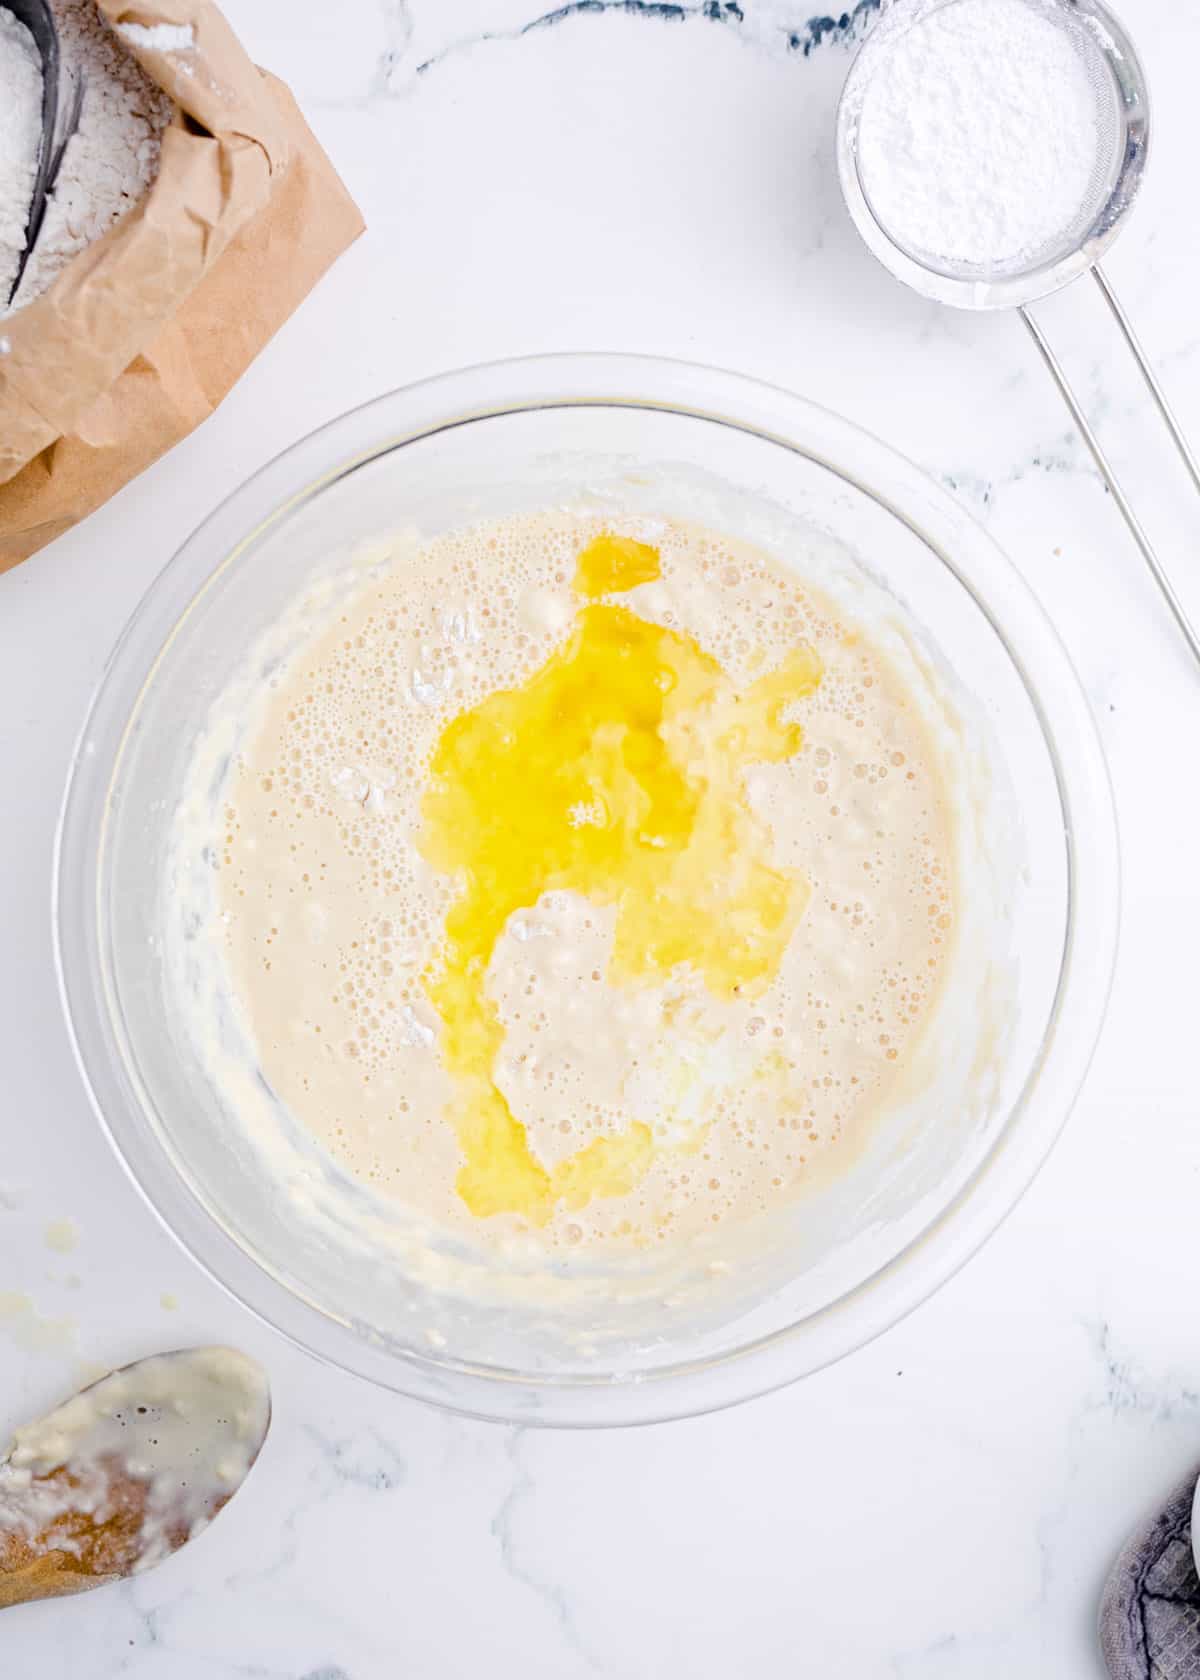 butter and egg added into a clear bowl with flour and yeast